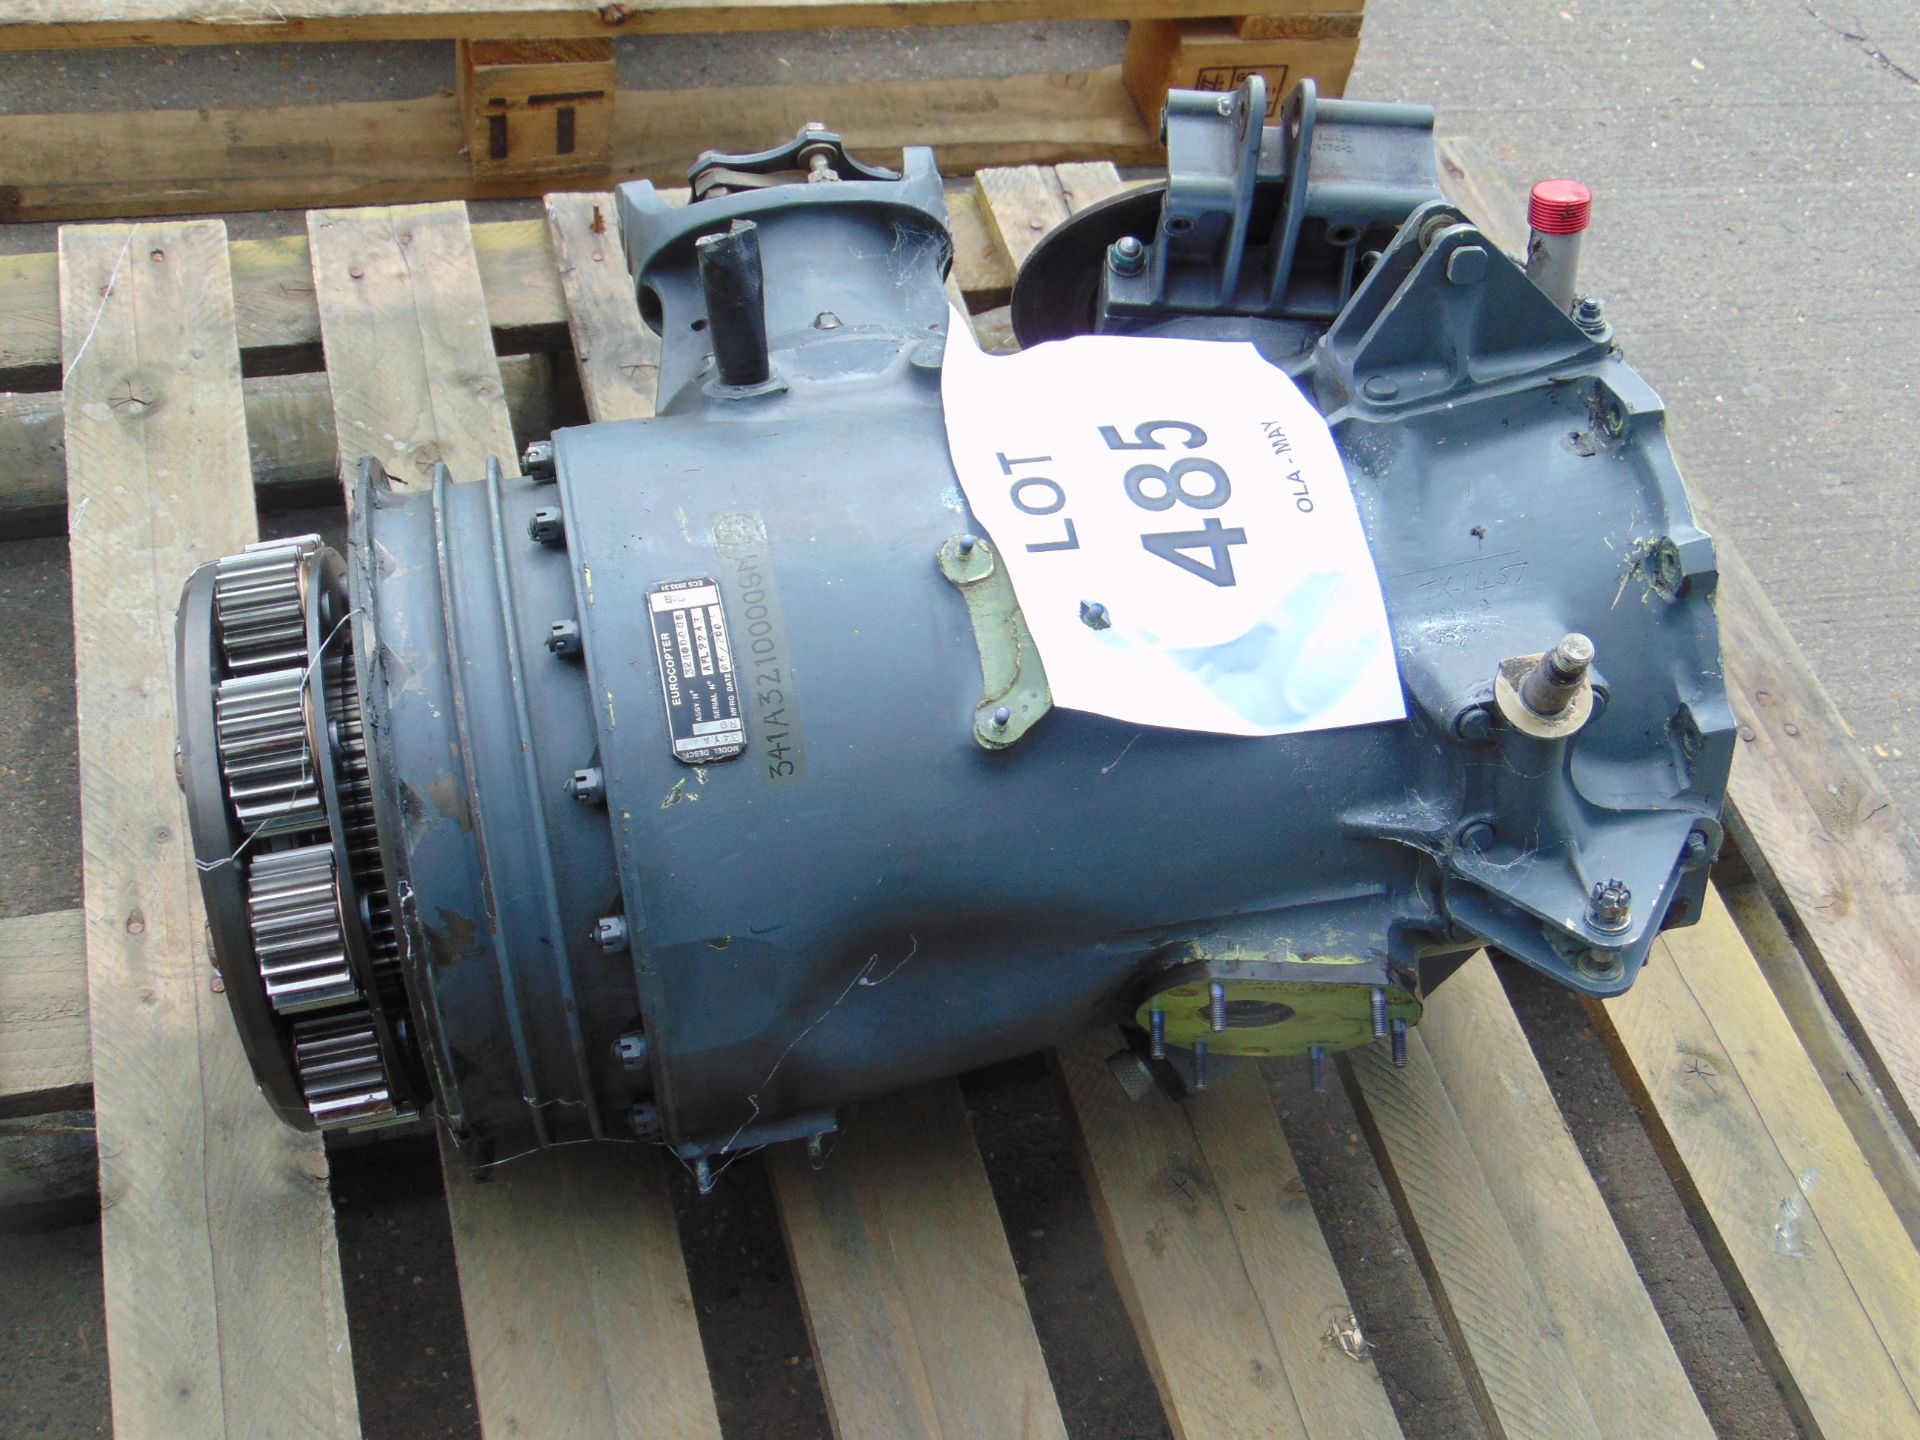 GAZELLE MAIN ROTOR GEARBOX ASSEMBLY - Image 3 of 6